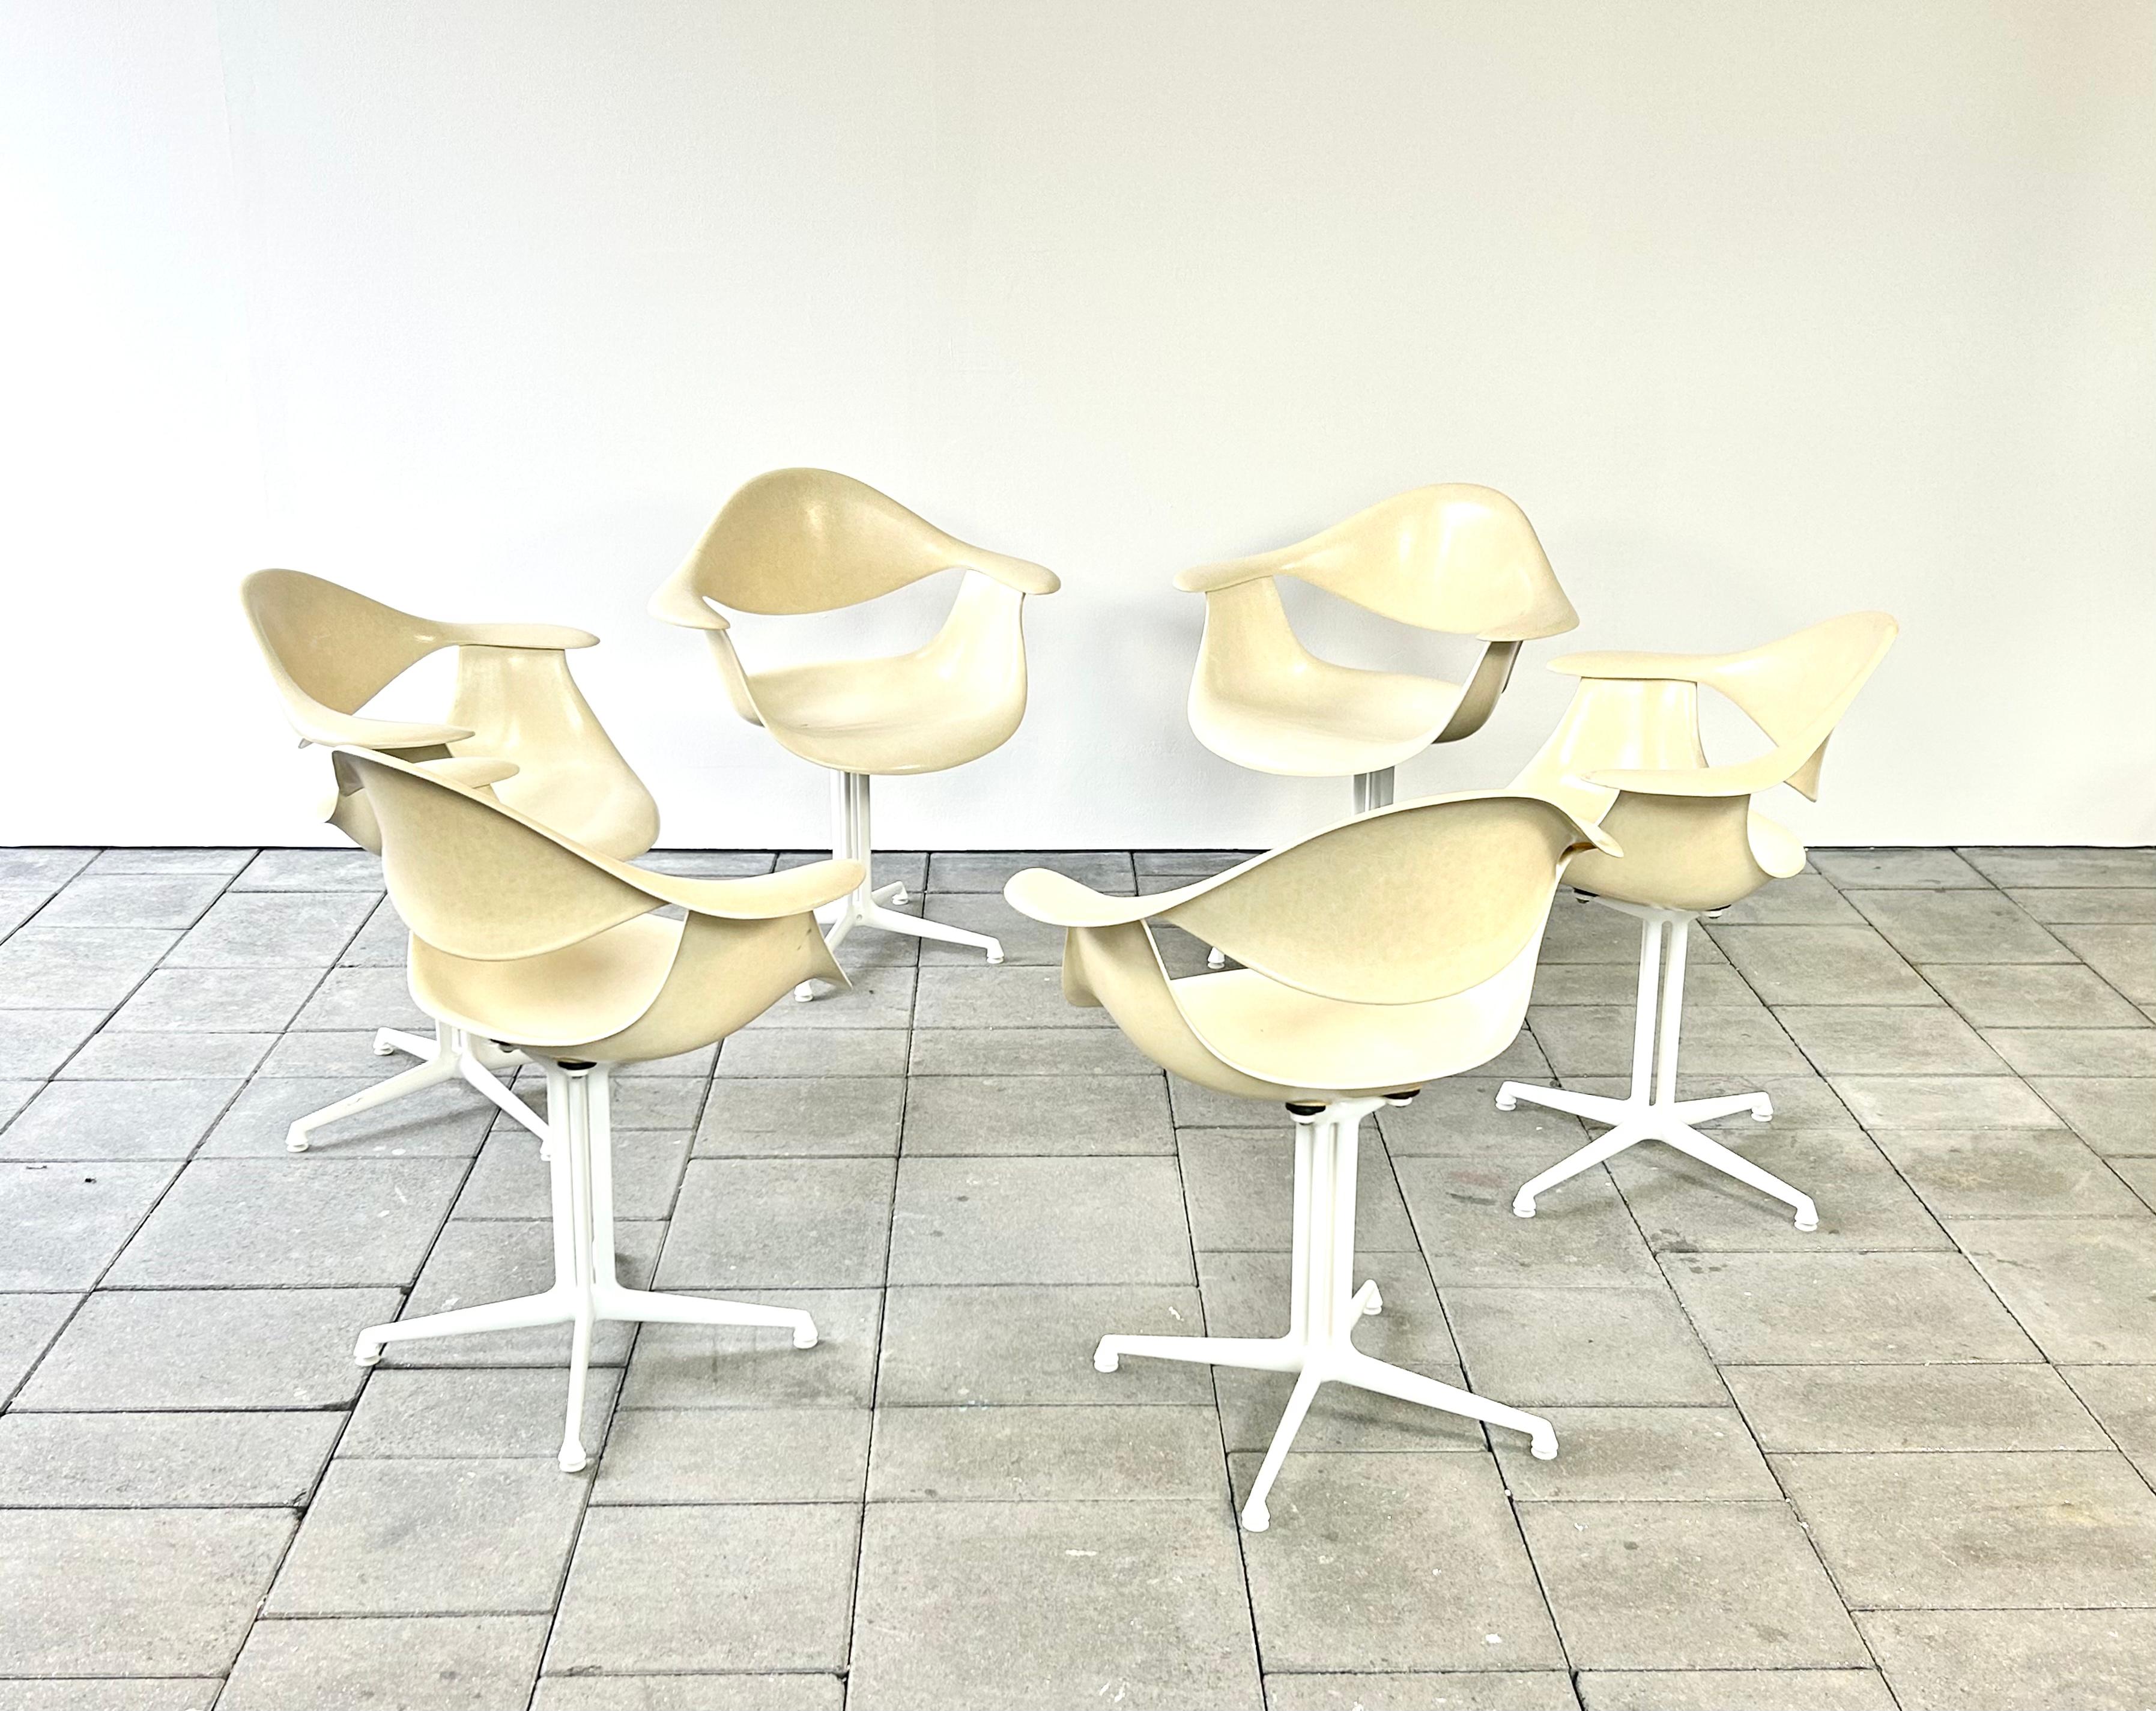 Beautiful set of 6 Herman Miller DAF fiberglass chairs, designed by George Nelson.

The DAF chair is perfectly suitable as a dining chair and due to it’s organic design will fit perfectly to large dining tables of the period. 

The DAF Chair